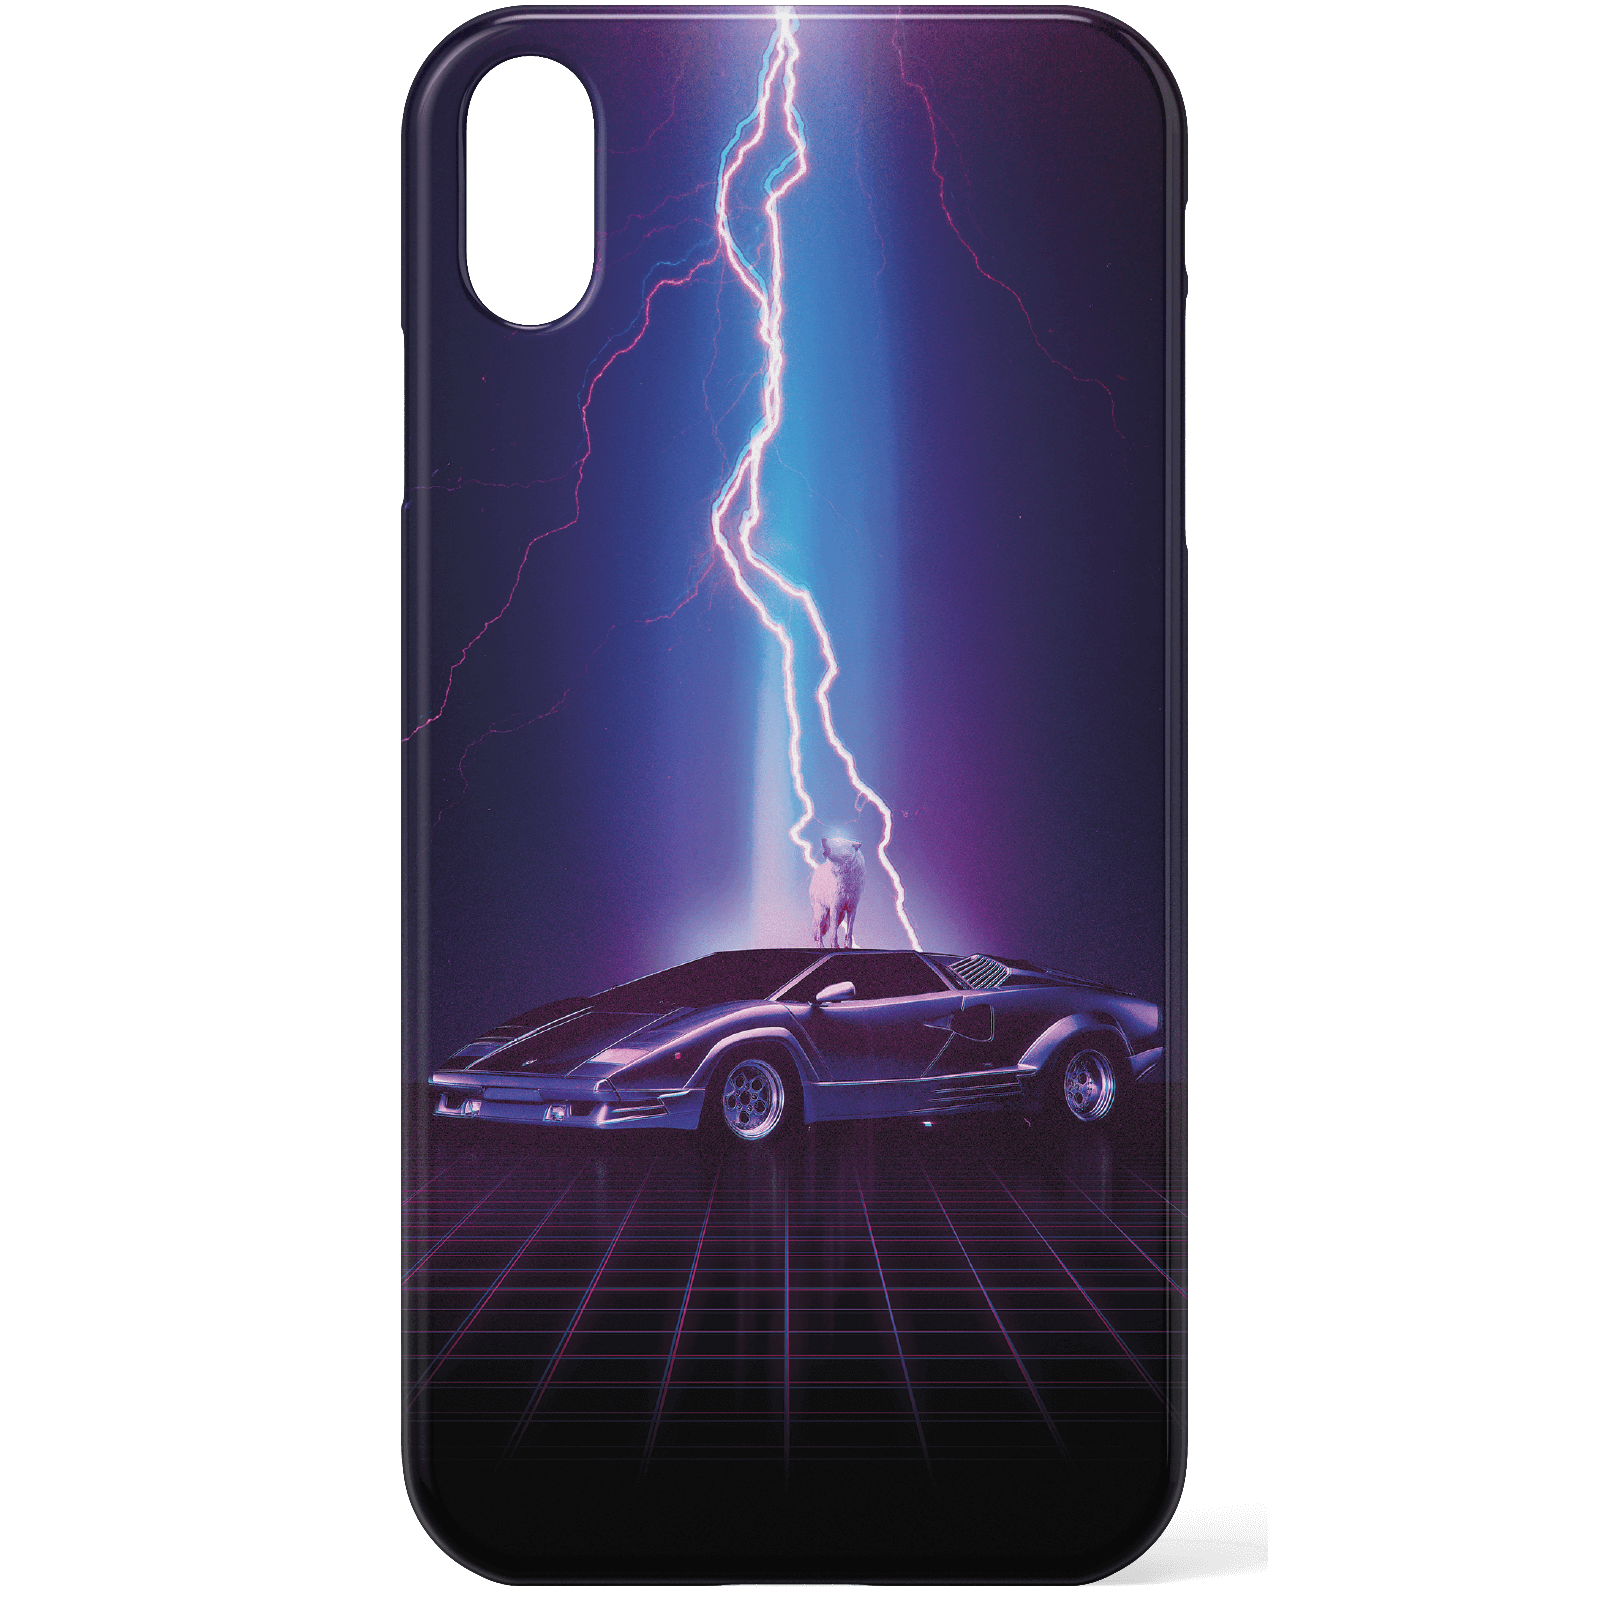 Legendary Moment Phone Case for iPhone and Android - iPhone XS - Snap Case - Matte